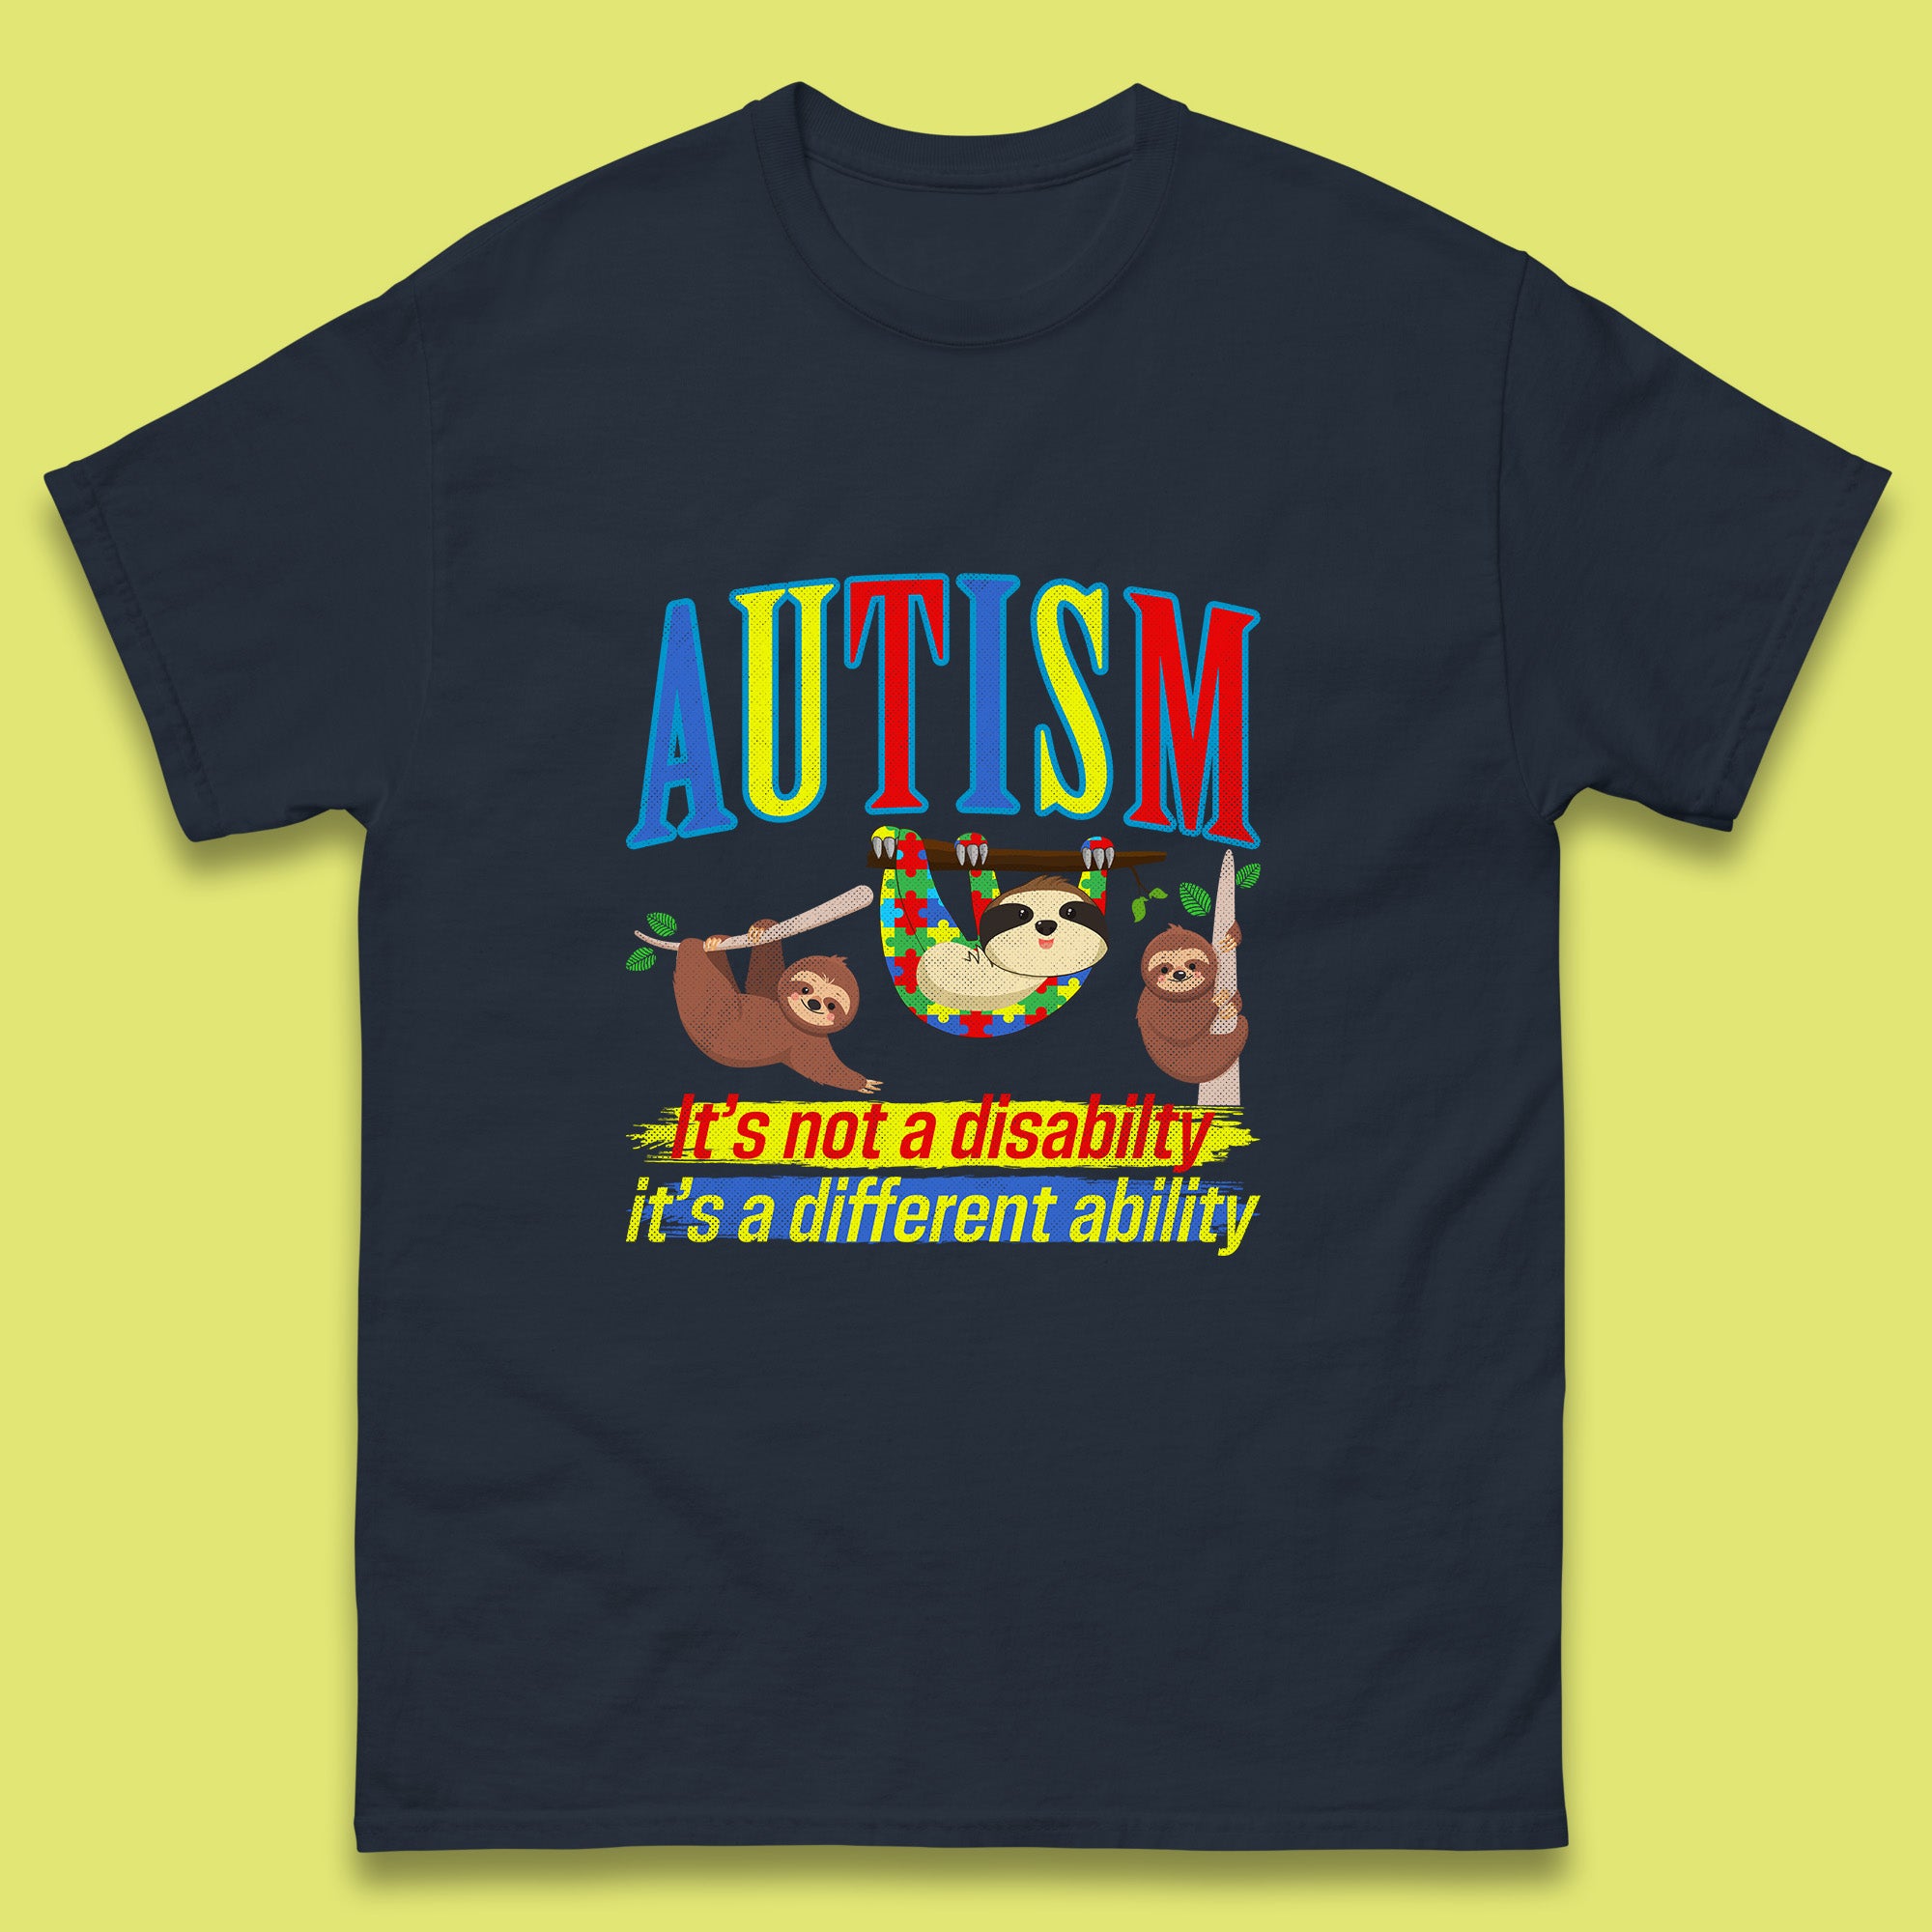 Autism Sloth It's Not A Disability It's A Different Ability Autism Awareness Autism Support Autism Warrior Mens Tee Top